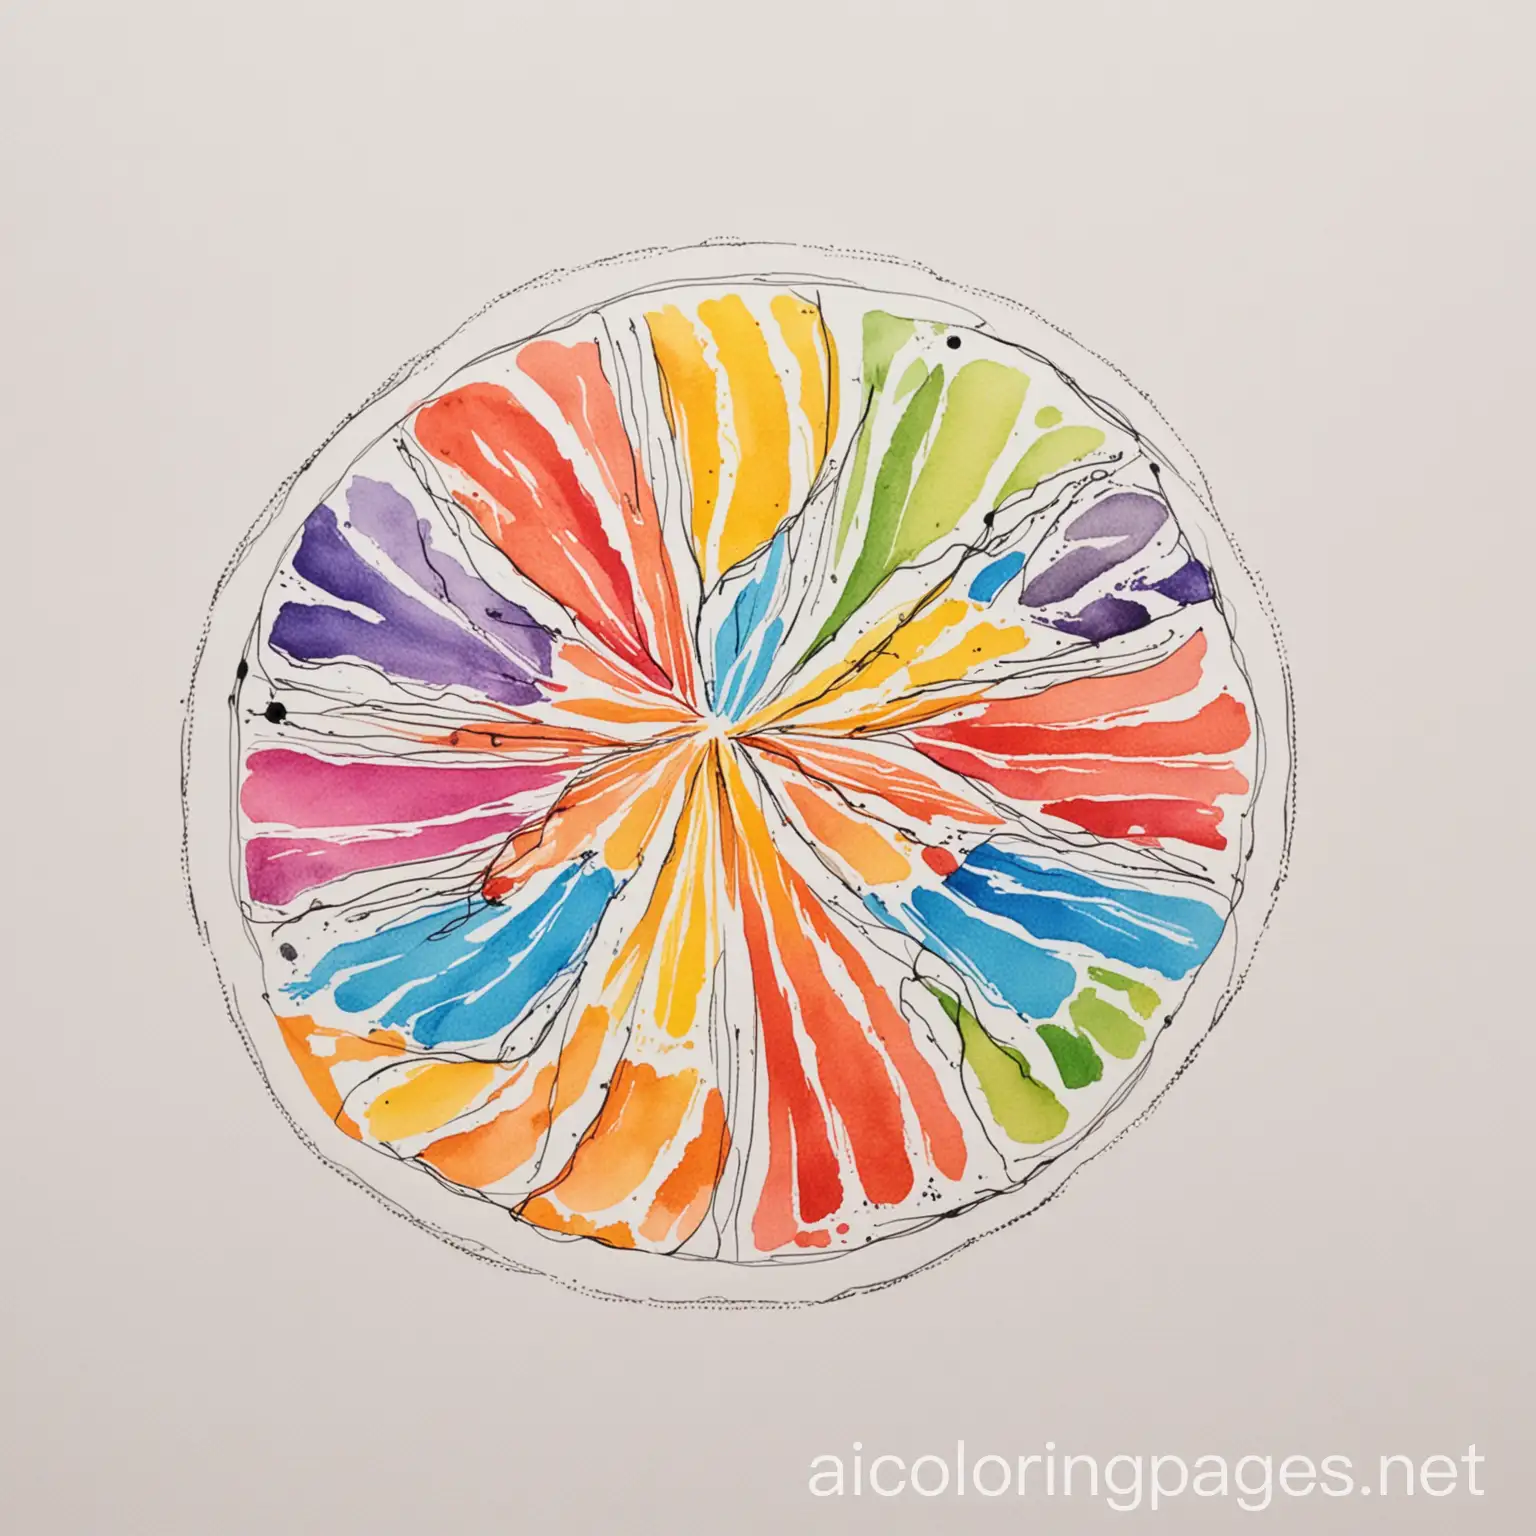 red orange yellow green blue purple pink beige grey white black, Coloring Page, black and white, line art, white background, Simplicity, Ample White Space